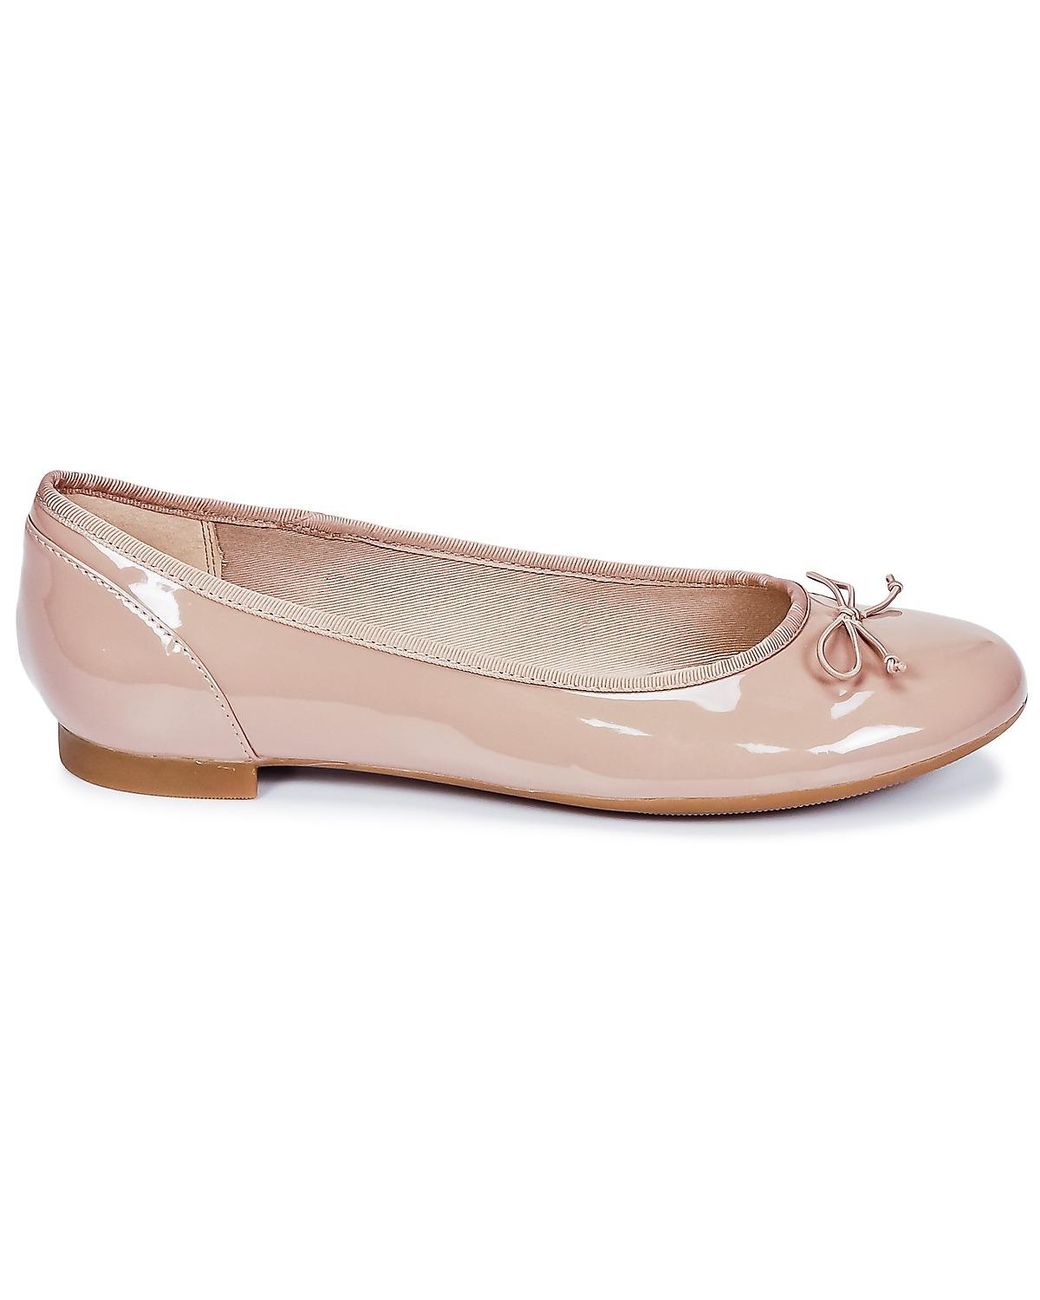 Clarks Couture Bloom Women's Shoes (pumps / Ballerinas) In Multicolour in  Pink | Lyst UK